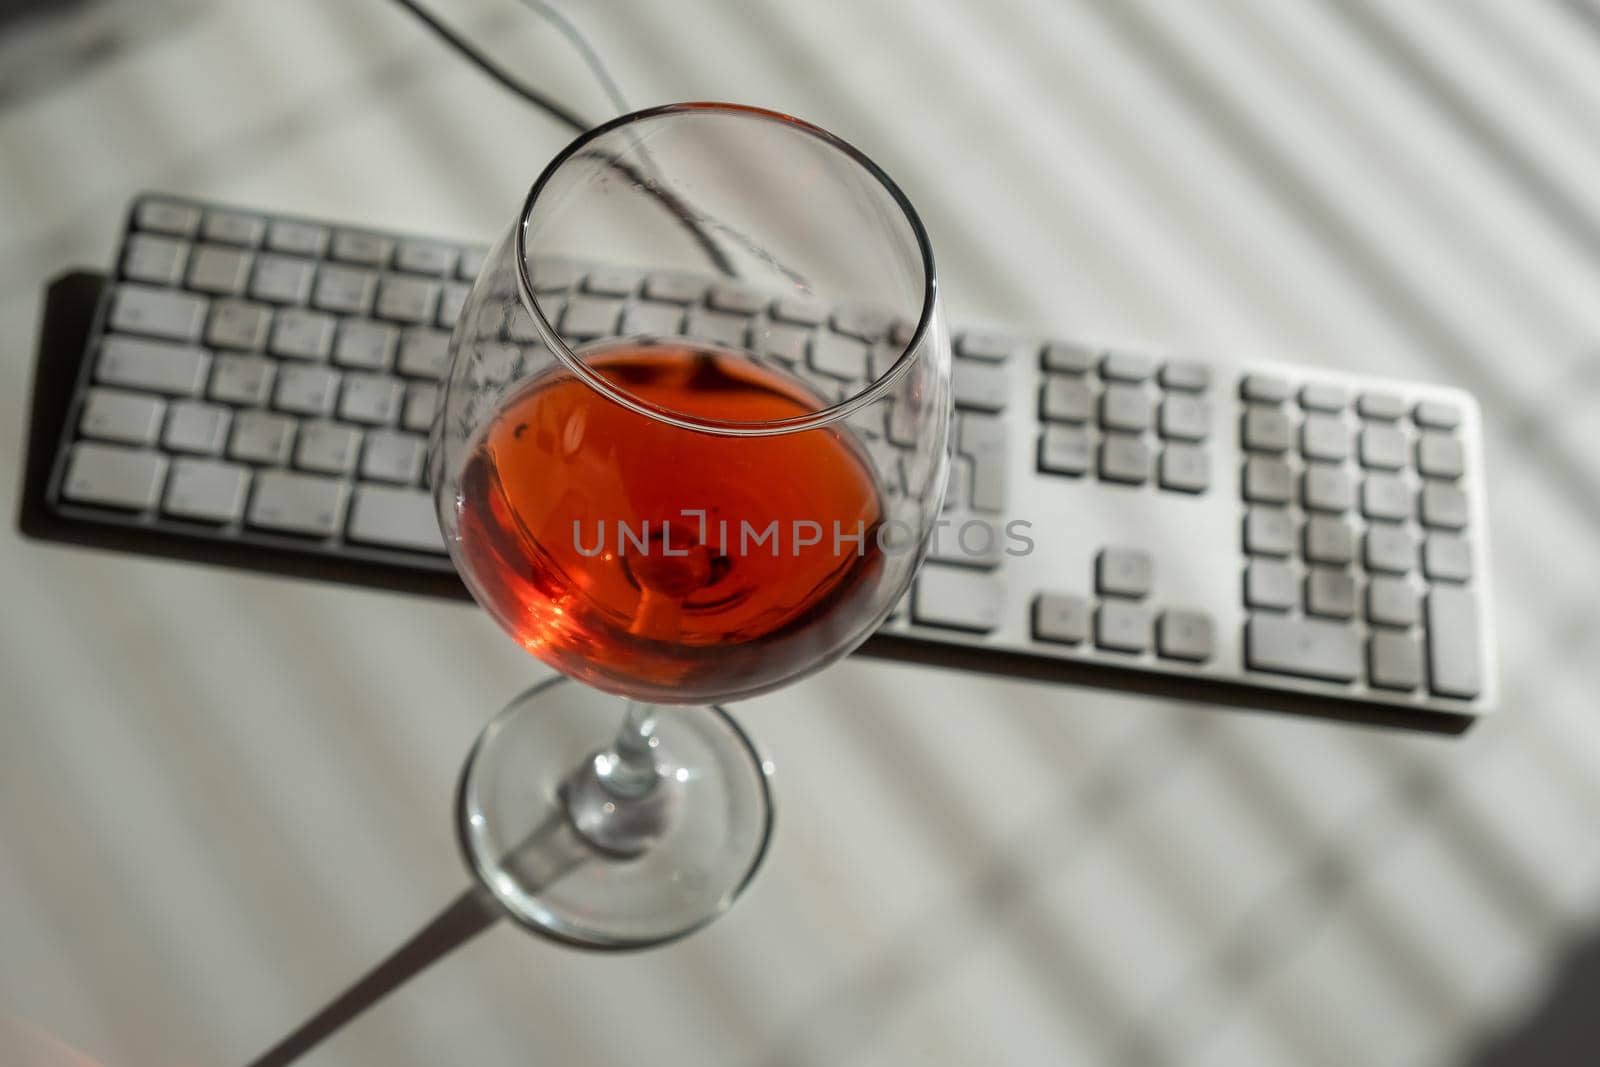 A goblet with red wine and a keyboard on a white table with shade from blinds.